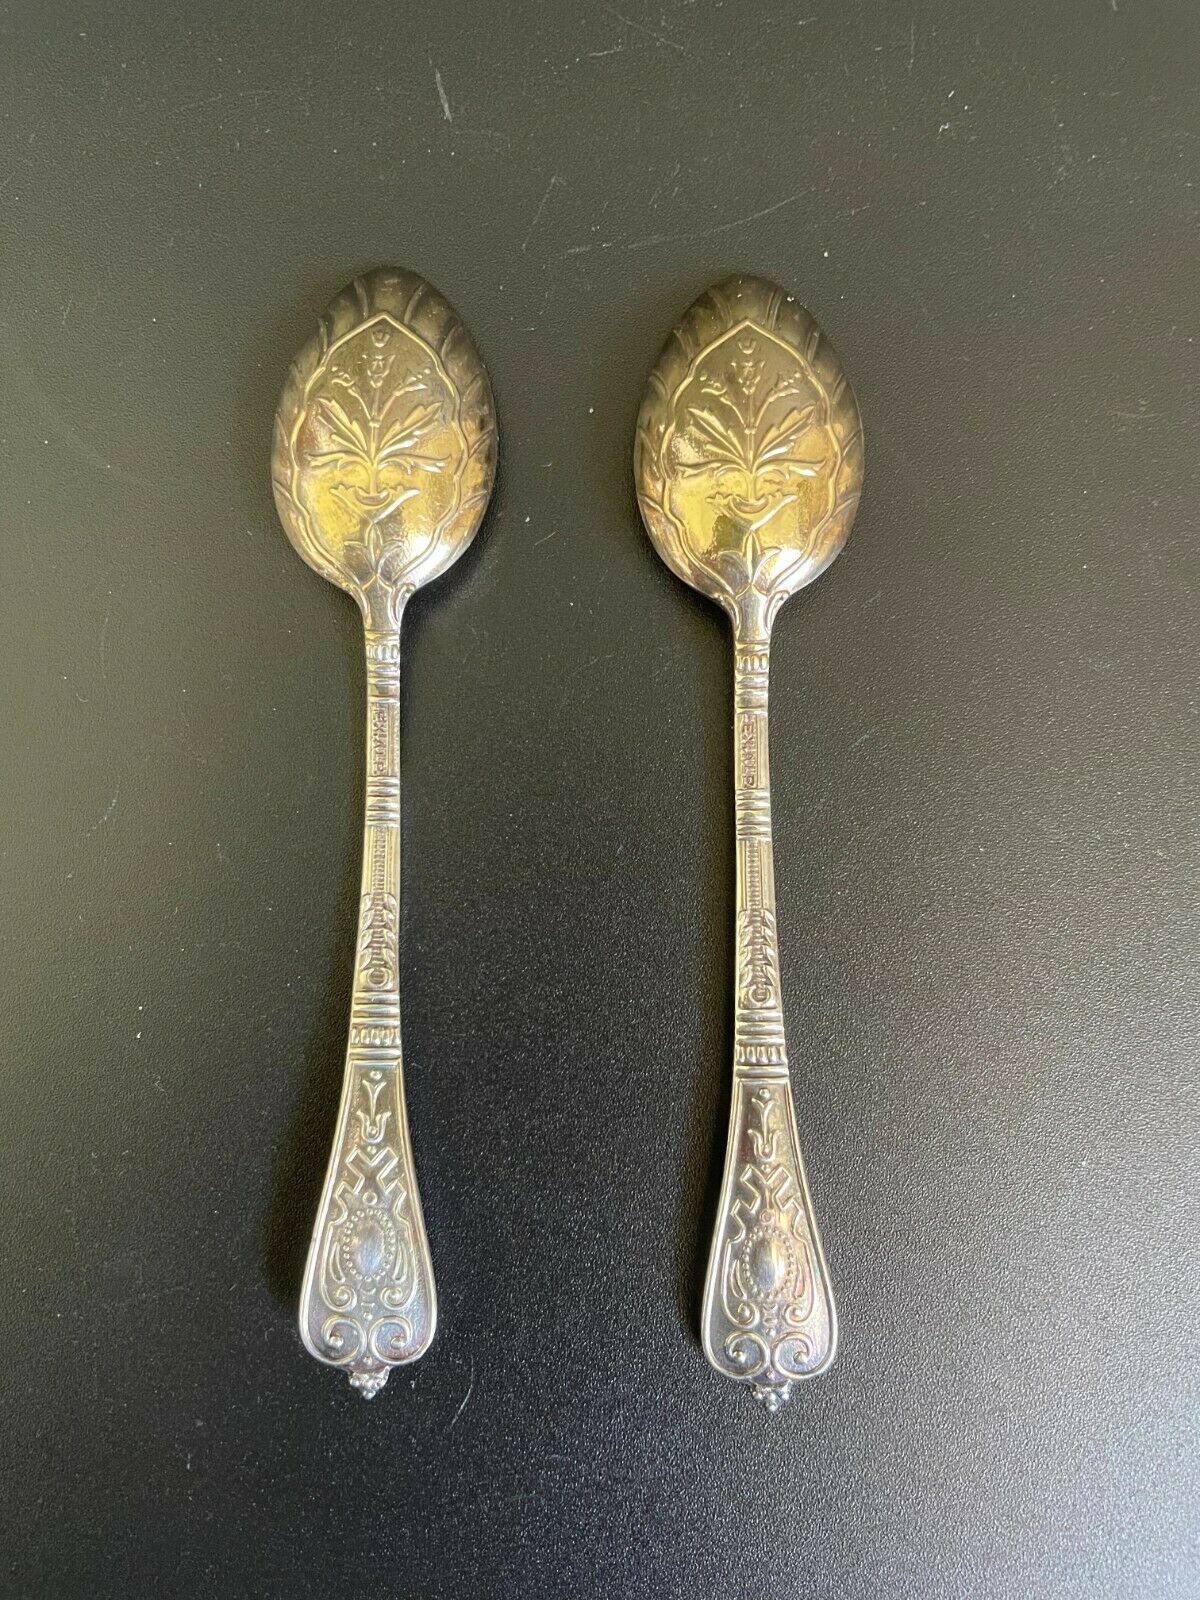 Primary image for Vintage Set of 2 Swedish Ornate Silverplate Demitasse Spoons w/ Gold Wash Bowl